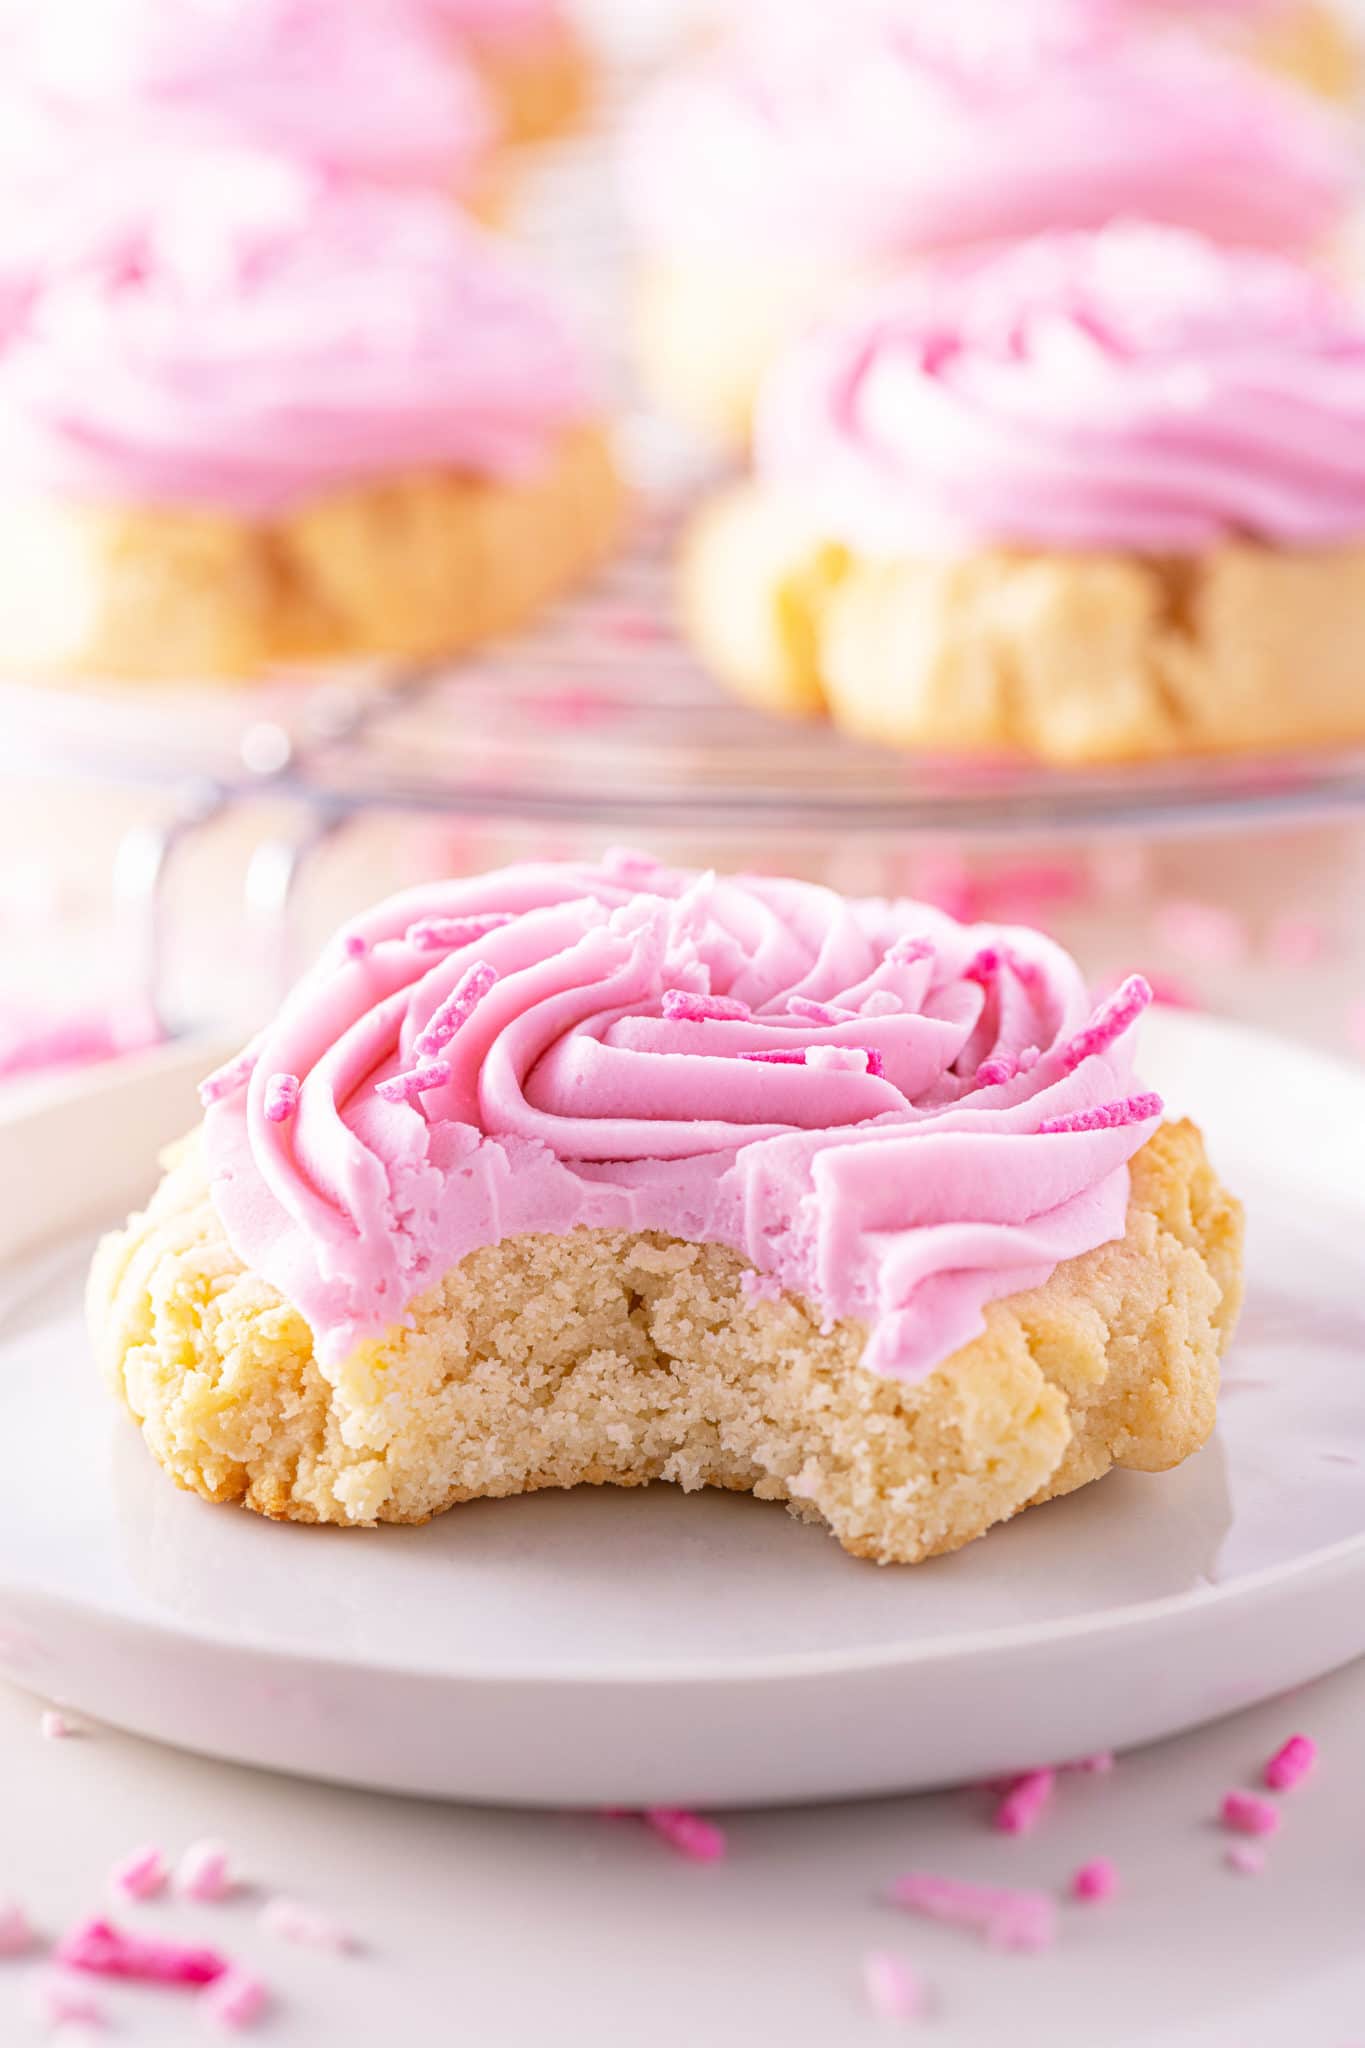 Vanilla keto sugar cookie with pink swirled frosting and pink sprinkles on a bright white plate.